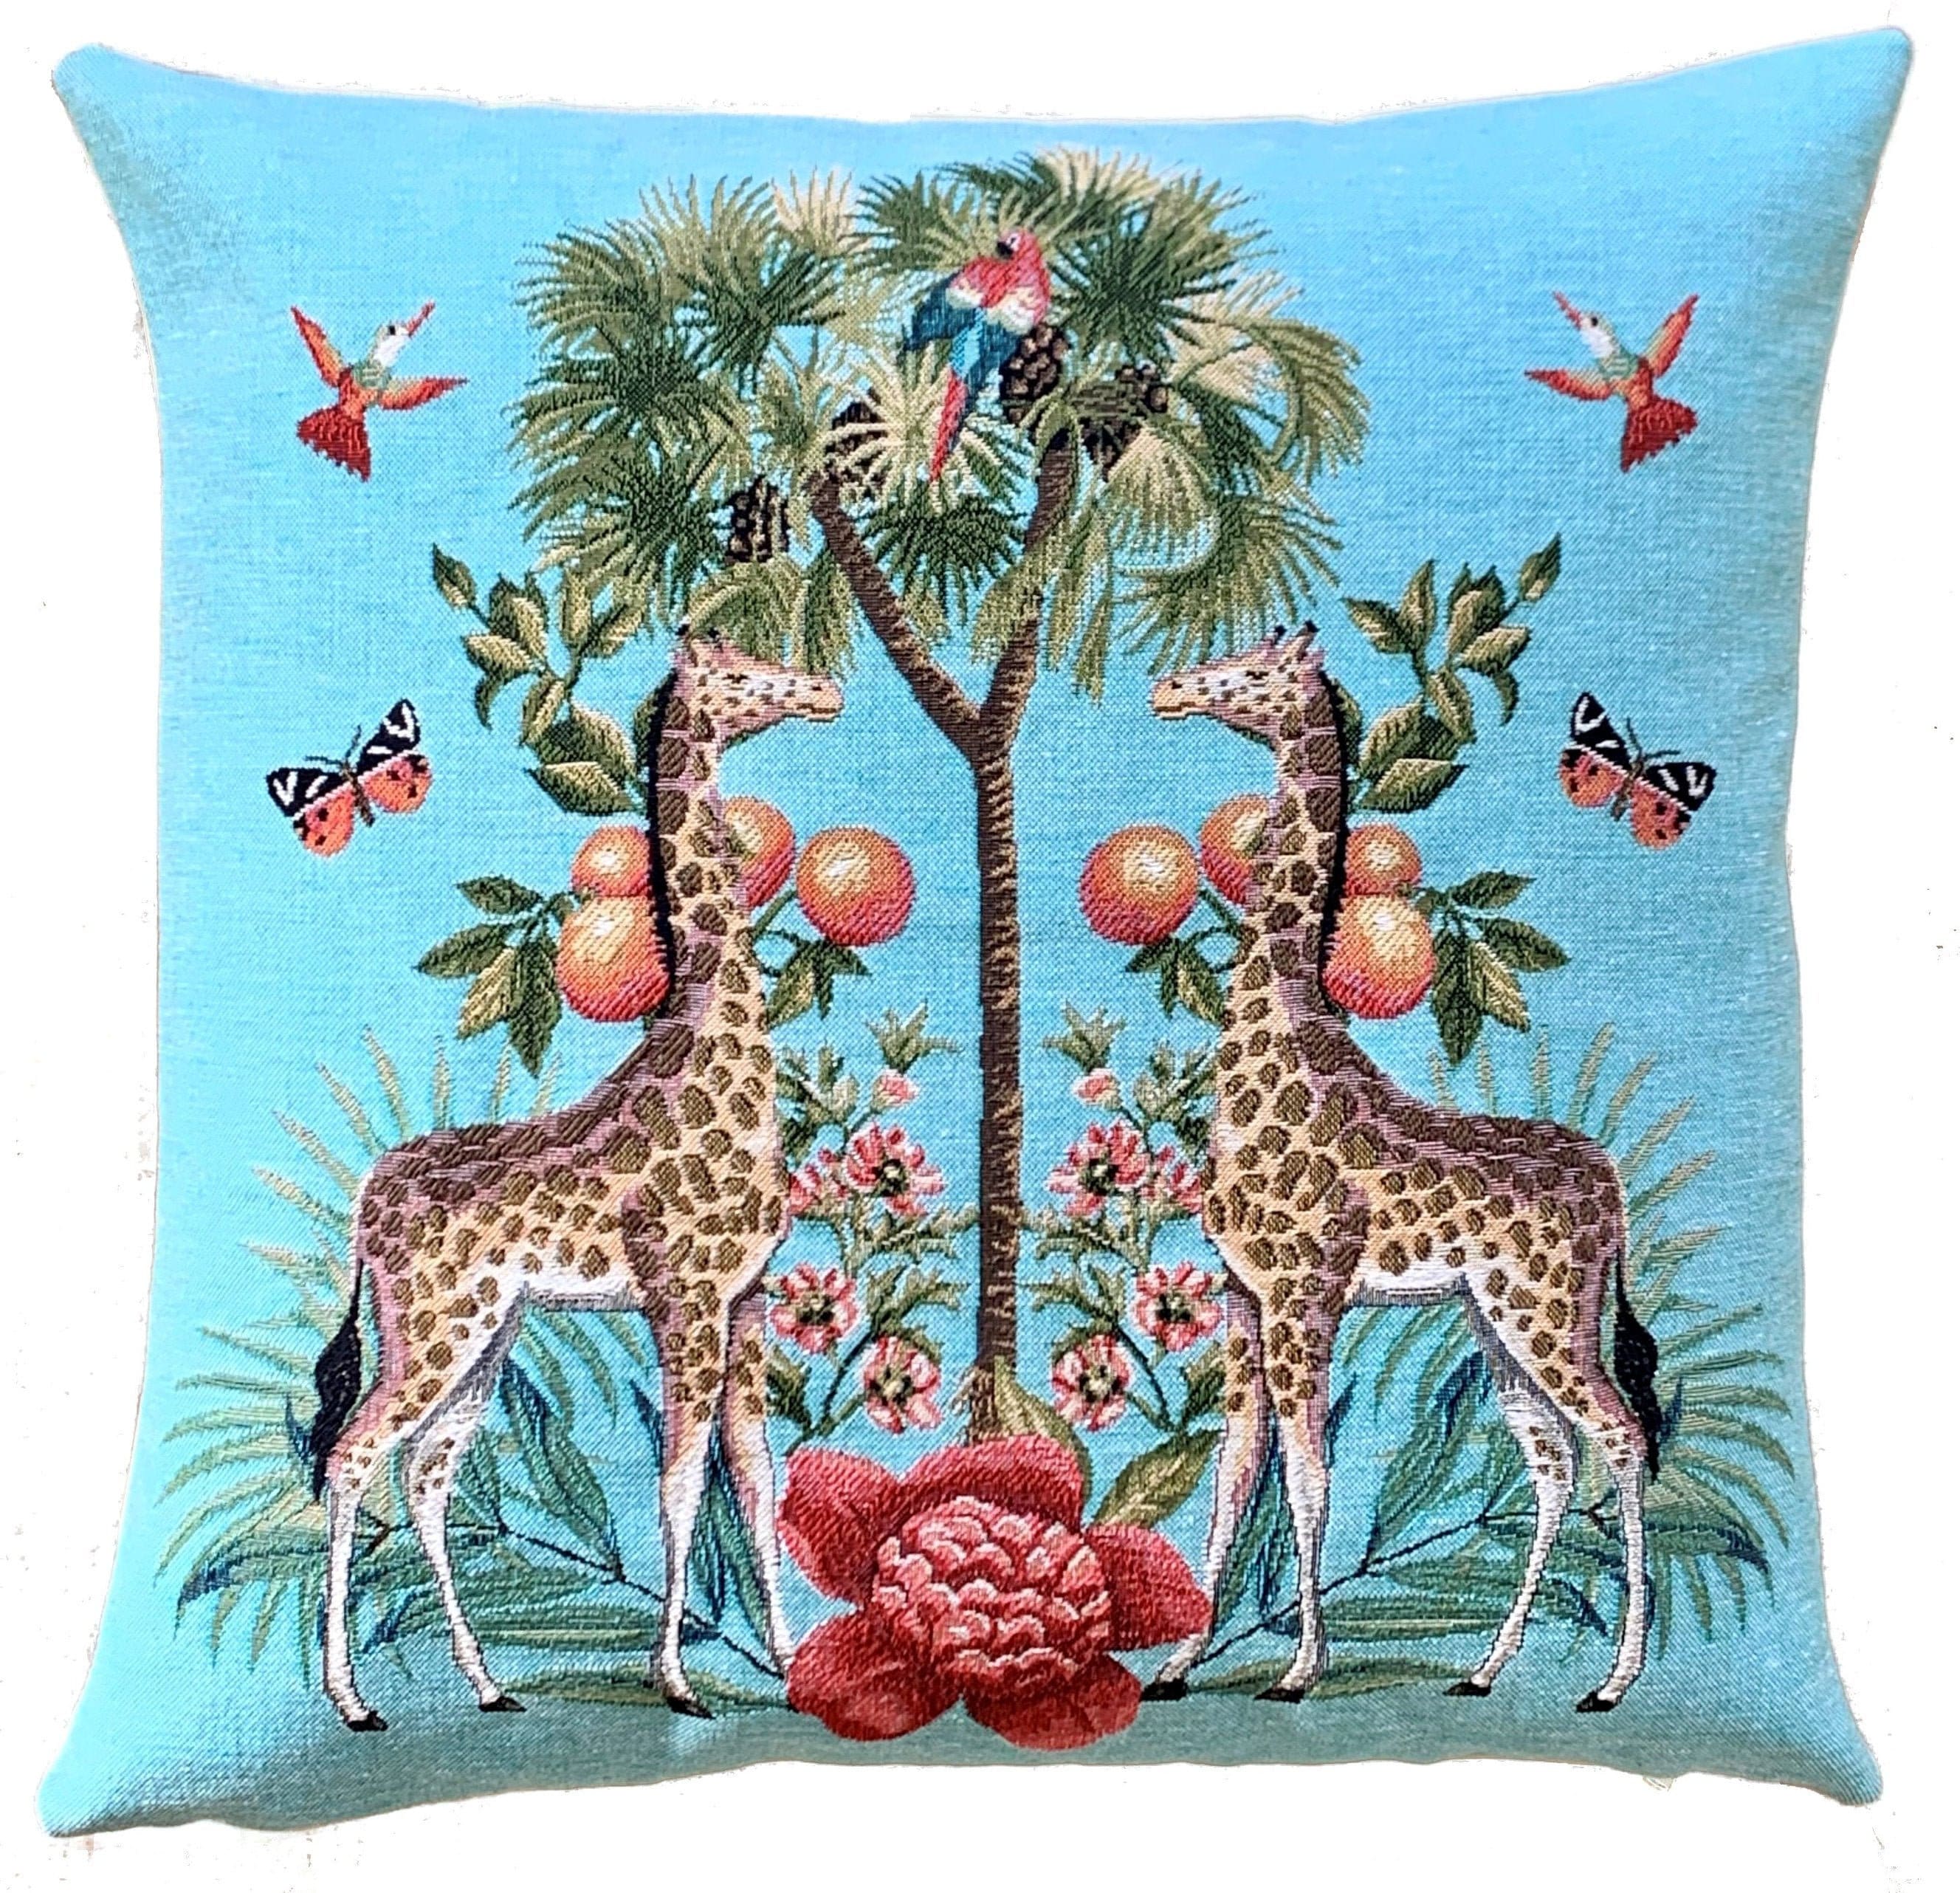 Giraffe Pillow Cover - Palmtree Throw Pillow - Tropical Decor - Blue Decorative  Pillow - 18x18 inch Tapestry Cushion Cover - Tropical Gift